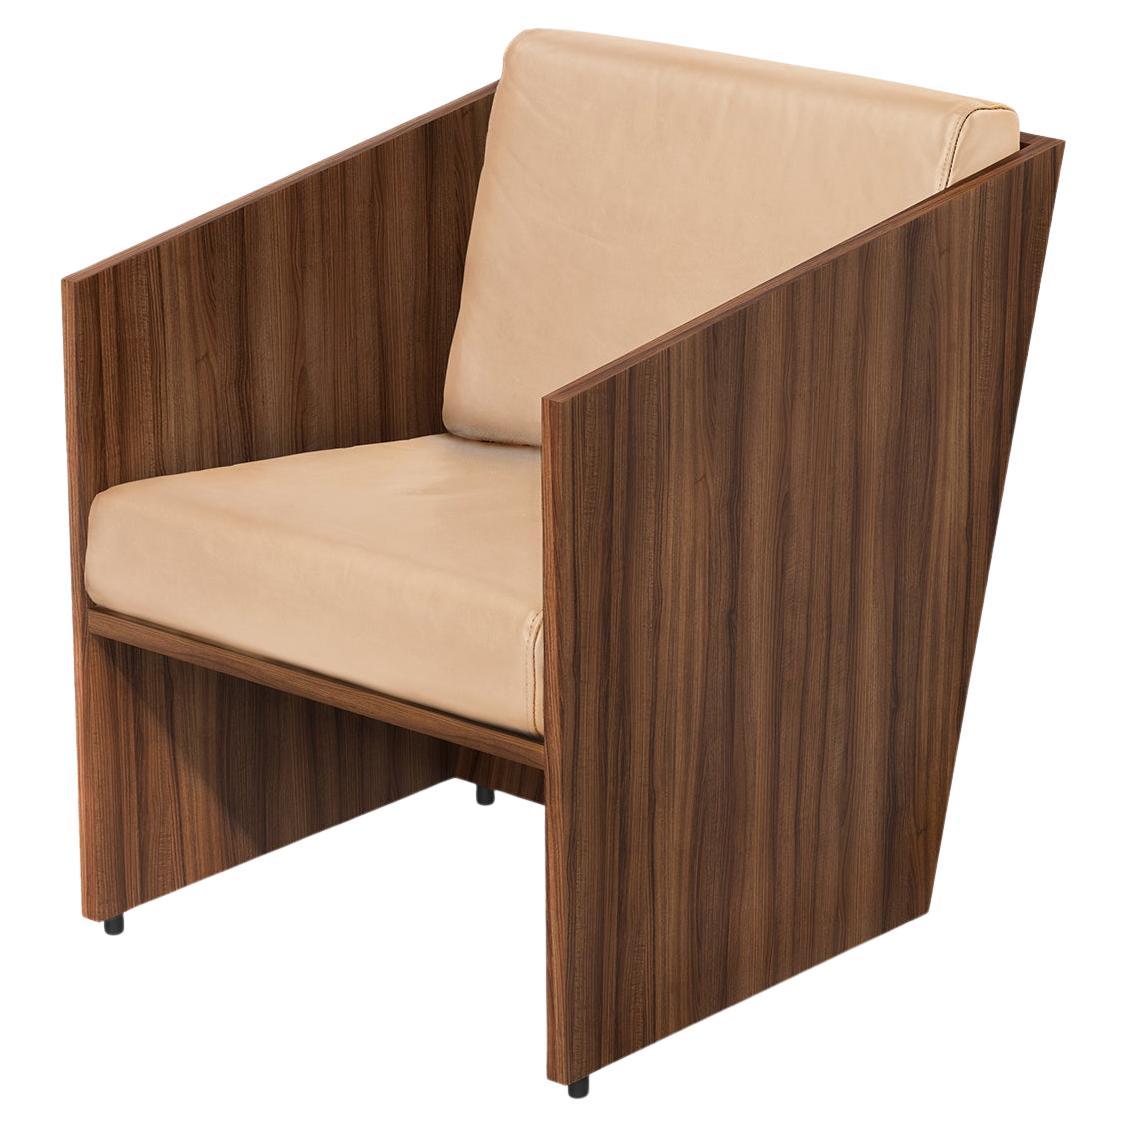 Álvaro Siza Vieira - Armchair in Walnut Wood and Natural Leather - one of a kind